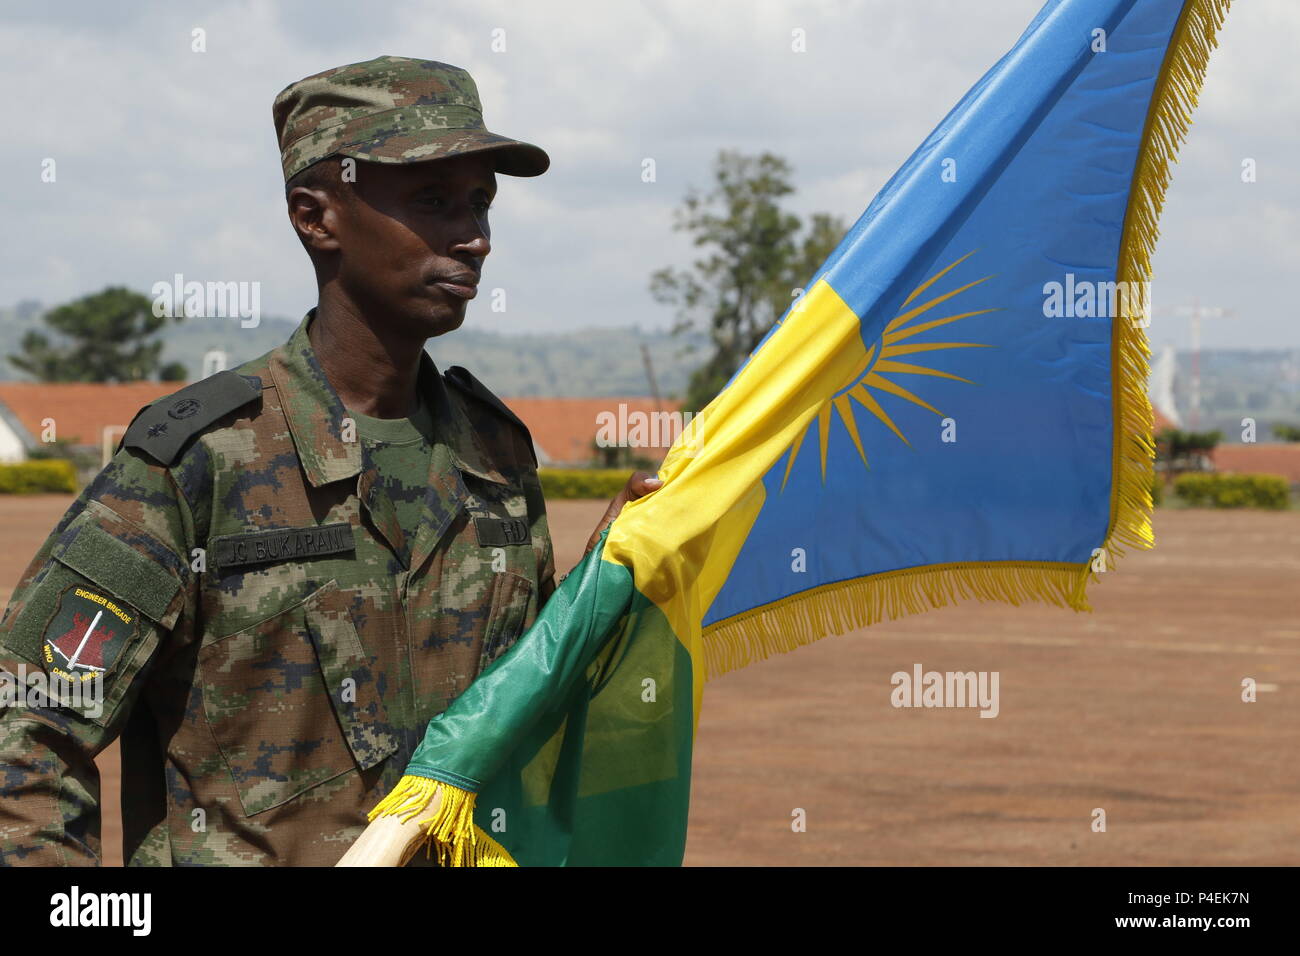 Rwanda Defence Force soldier, Justified Accord participant, holds the Rwanda flag in formation at the Justified Accord 2018 opening ceremony at the Ugandan Rapid Deployment Capability Center, Jinja, Uganda, June 18, 2018. JA18 brings together AMISOM troop contributing nations, partner nations from East Africa, and the U.S. to foster security cooperation while improving interoperability.(U.S. Army photo by Spc. Angelica Gardner) Stock Photo